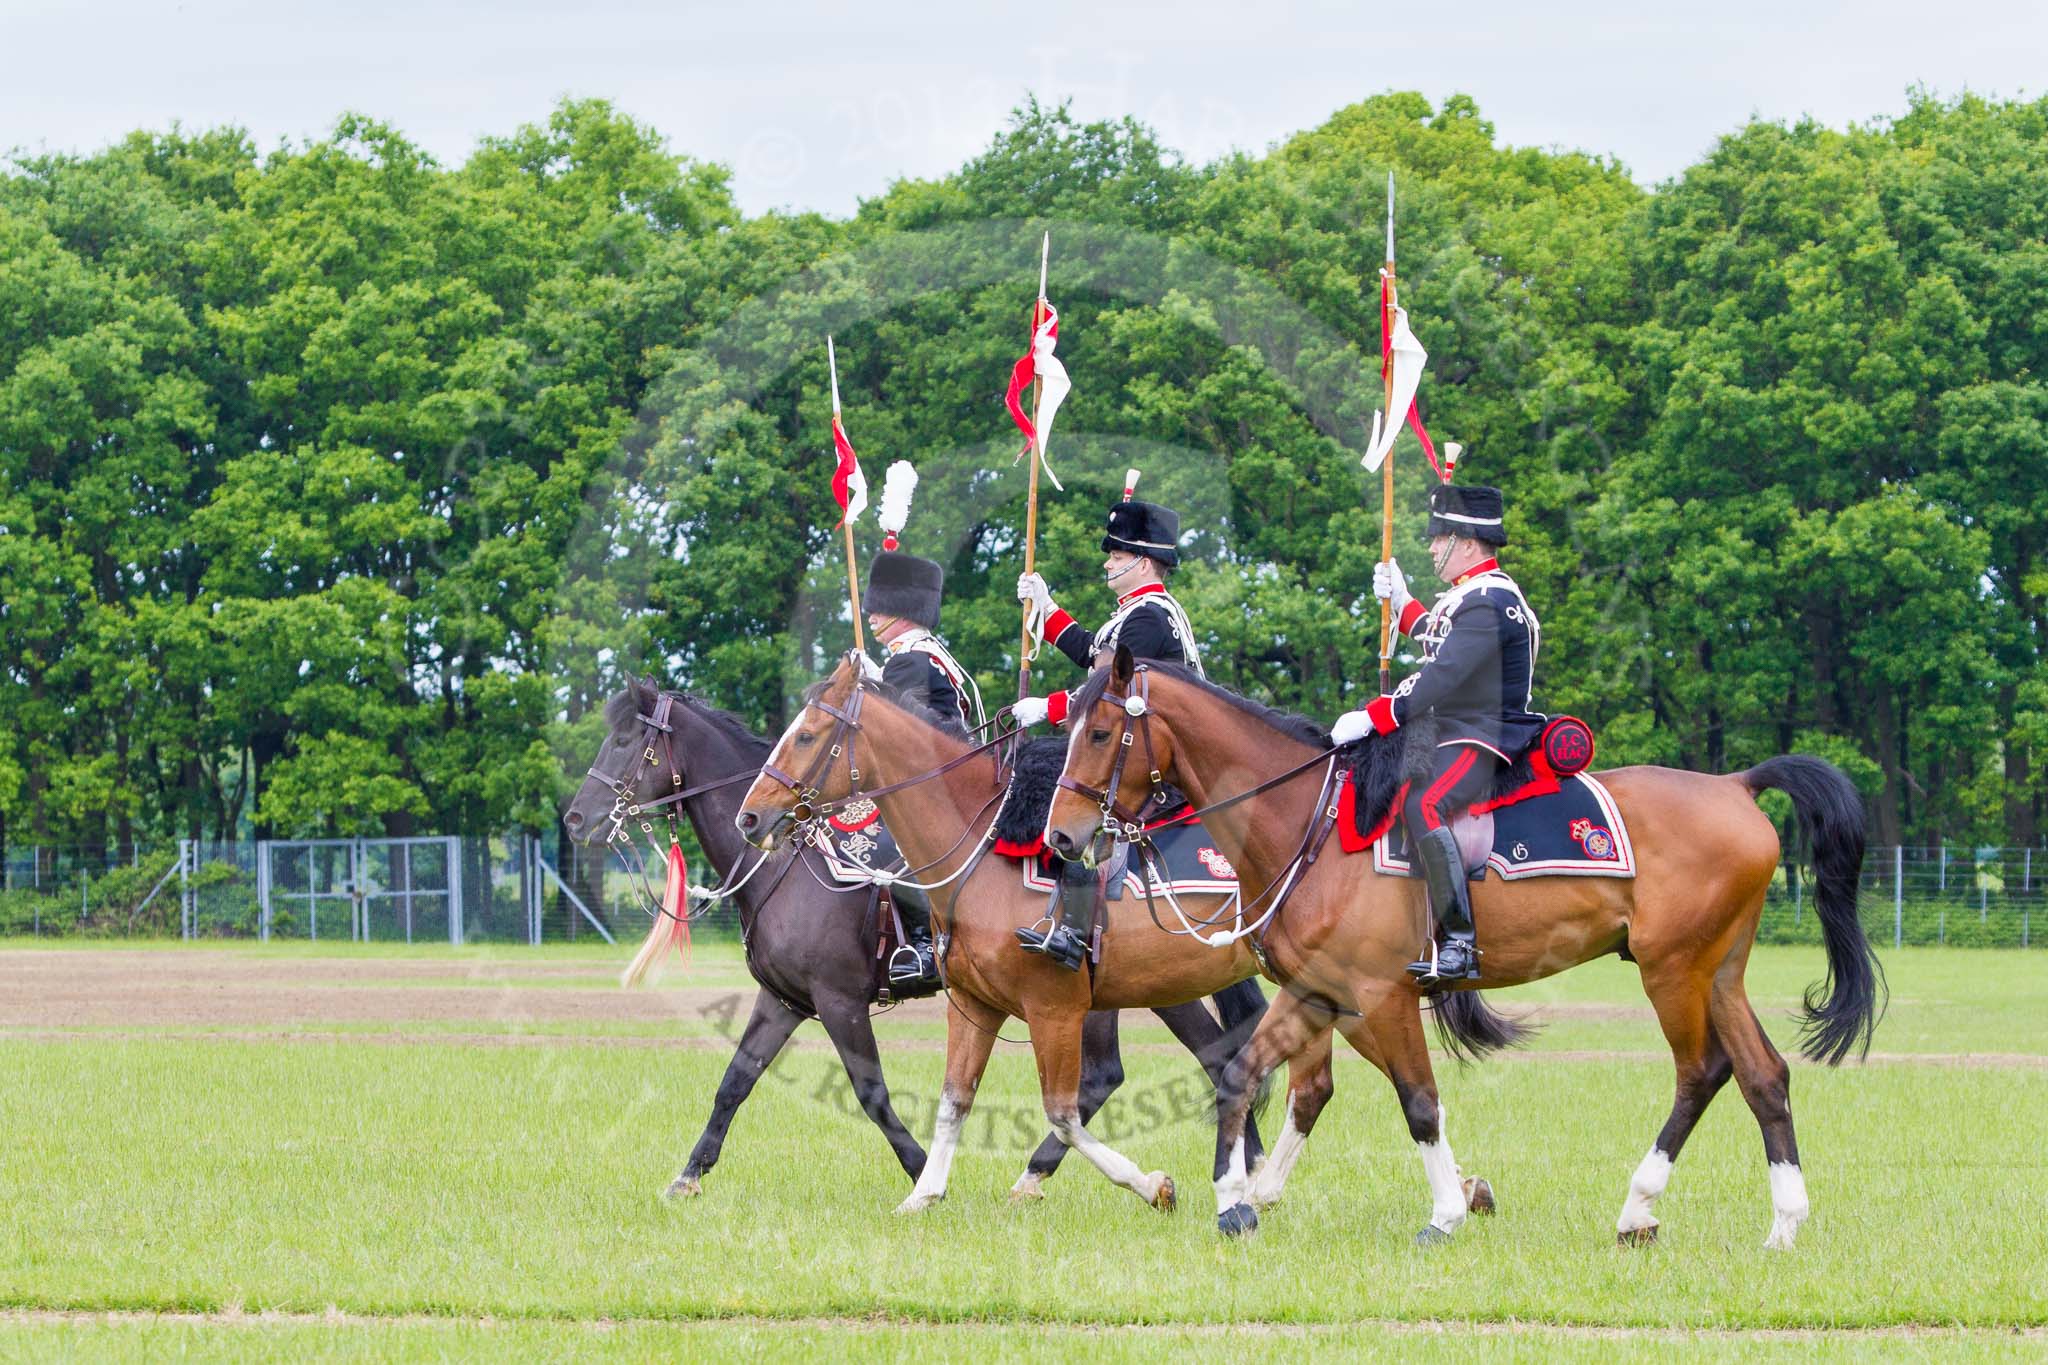 The Light Cavalry HAC Annual Review and Inspection 2013.
Windsor Great Park Review Ground,
Windsor,
Berkshire,
United Kingdom,
on 09 June 2013 at 14:33, image #539